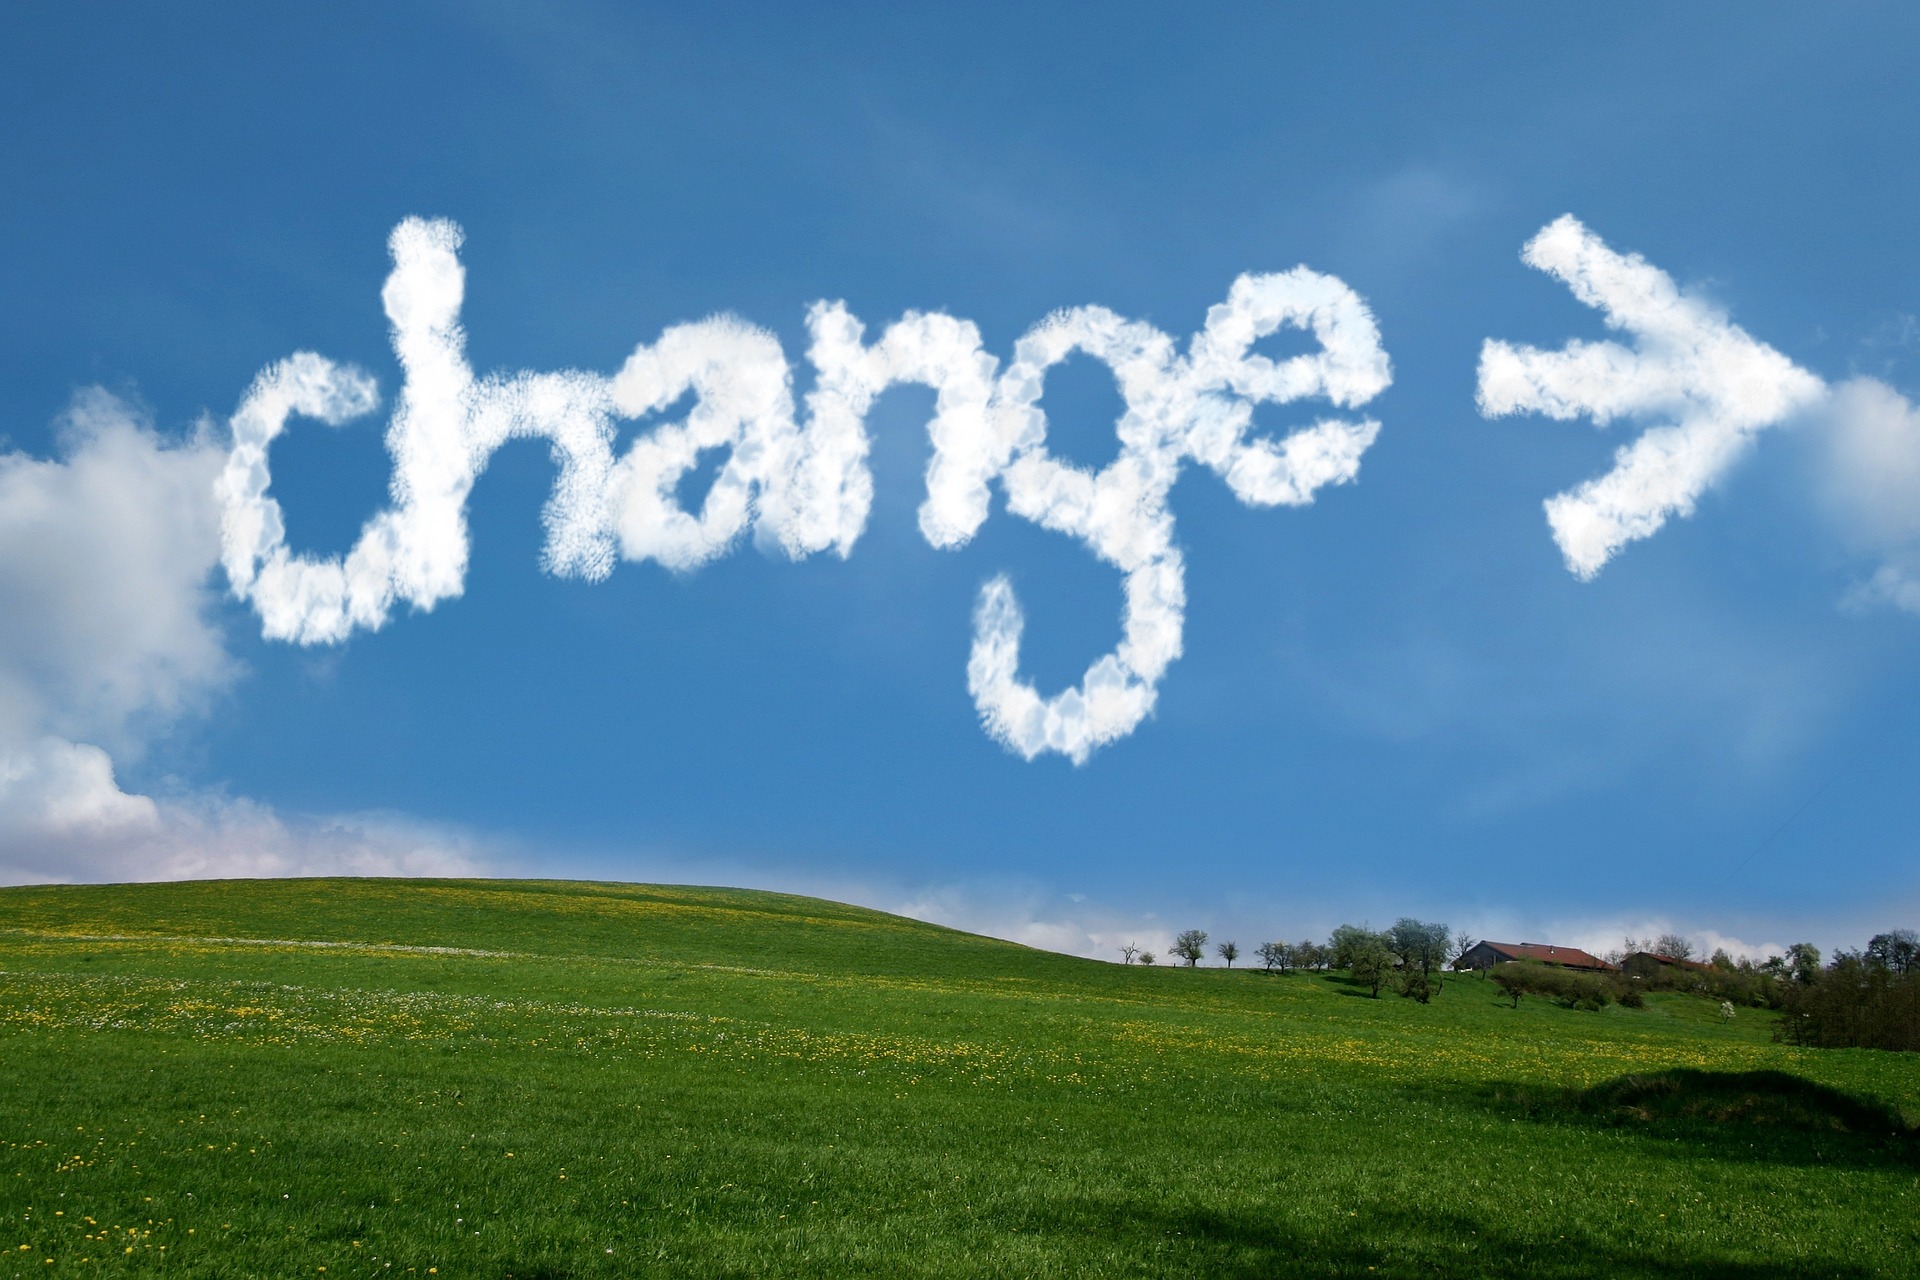 "Change ->" written in the sky in clouds; our Lasting Power of Attorney Solicitors in Preston discuss LPAs and their revocation.